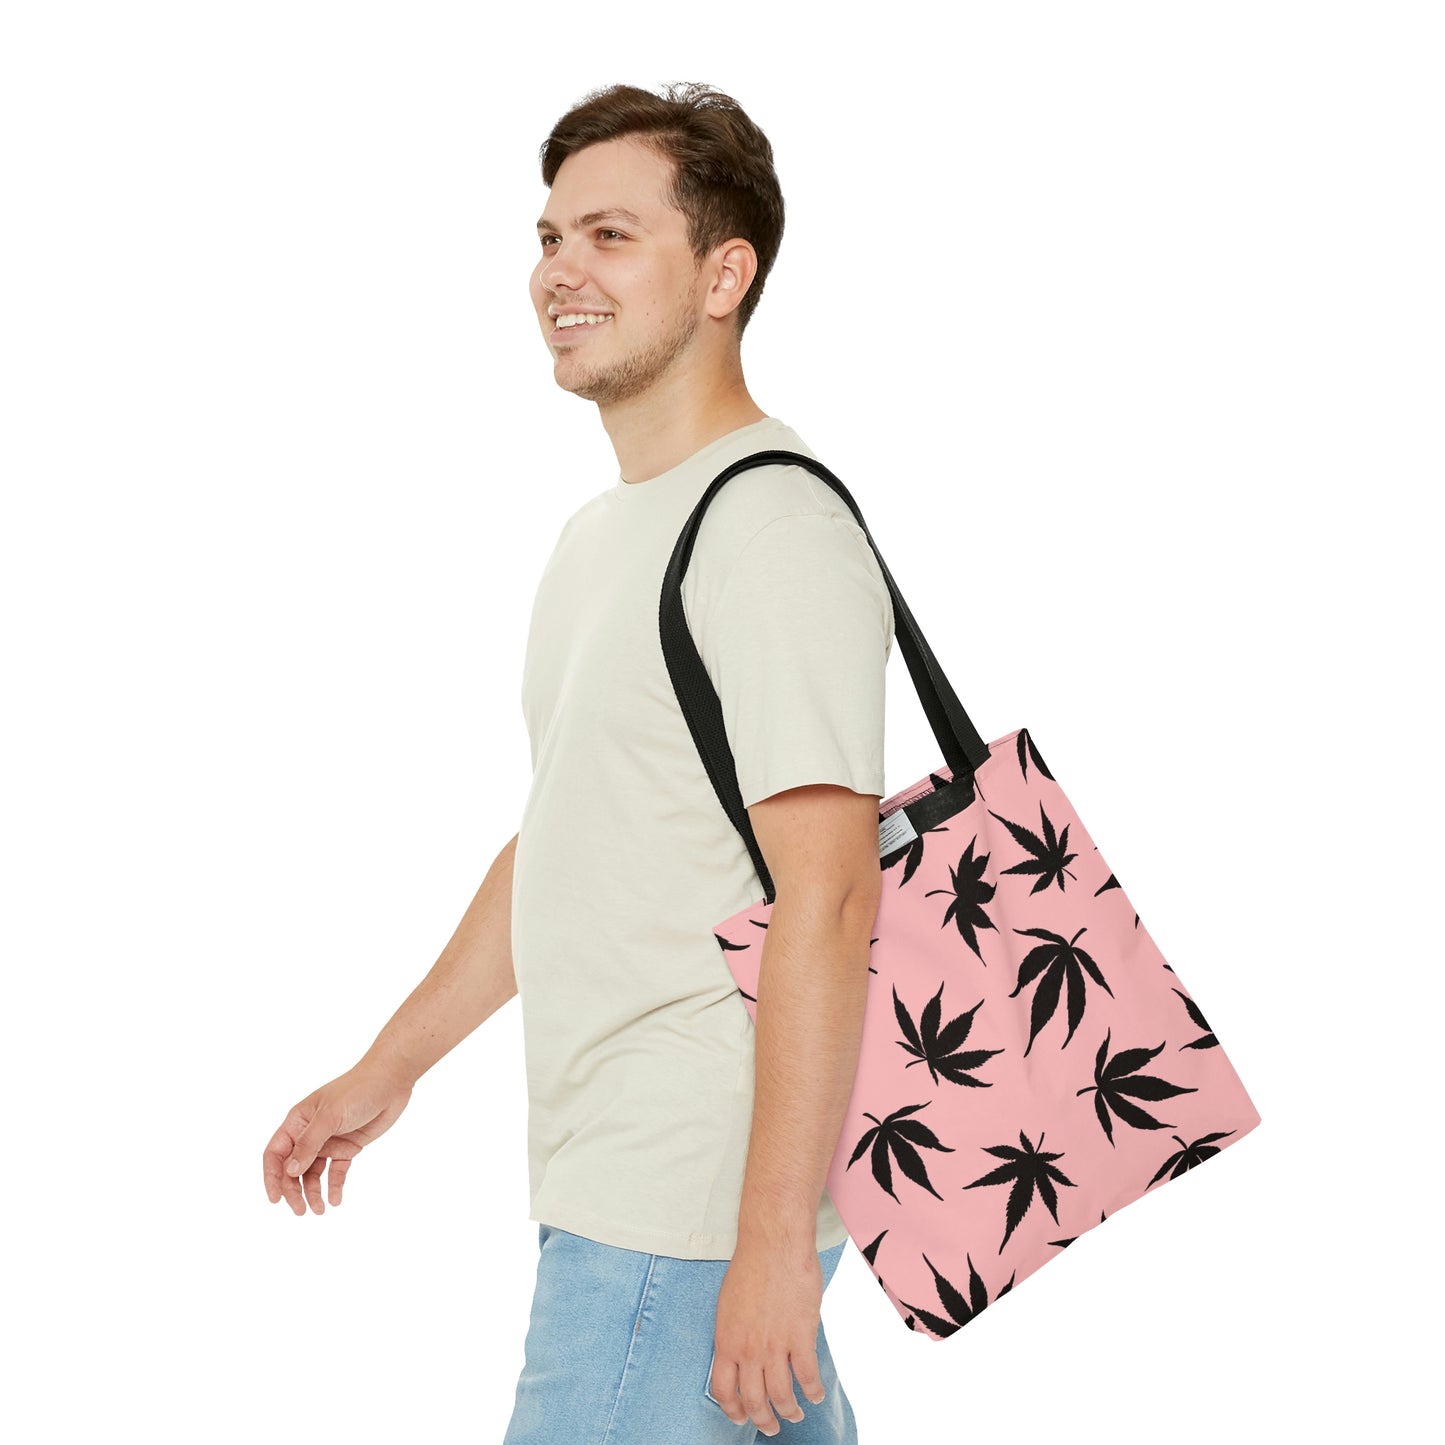 A man is smiling with his new Marijuana Leaves Pink Tote Bag